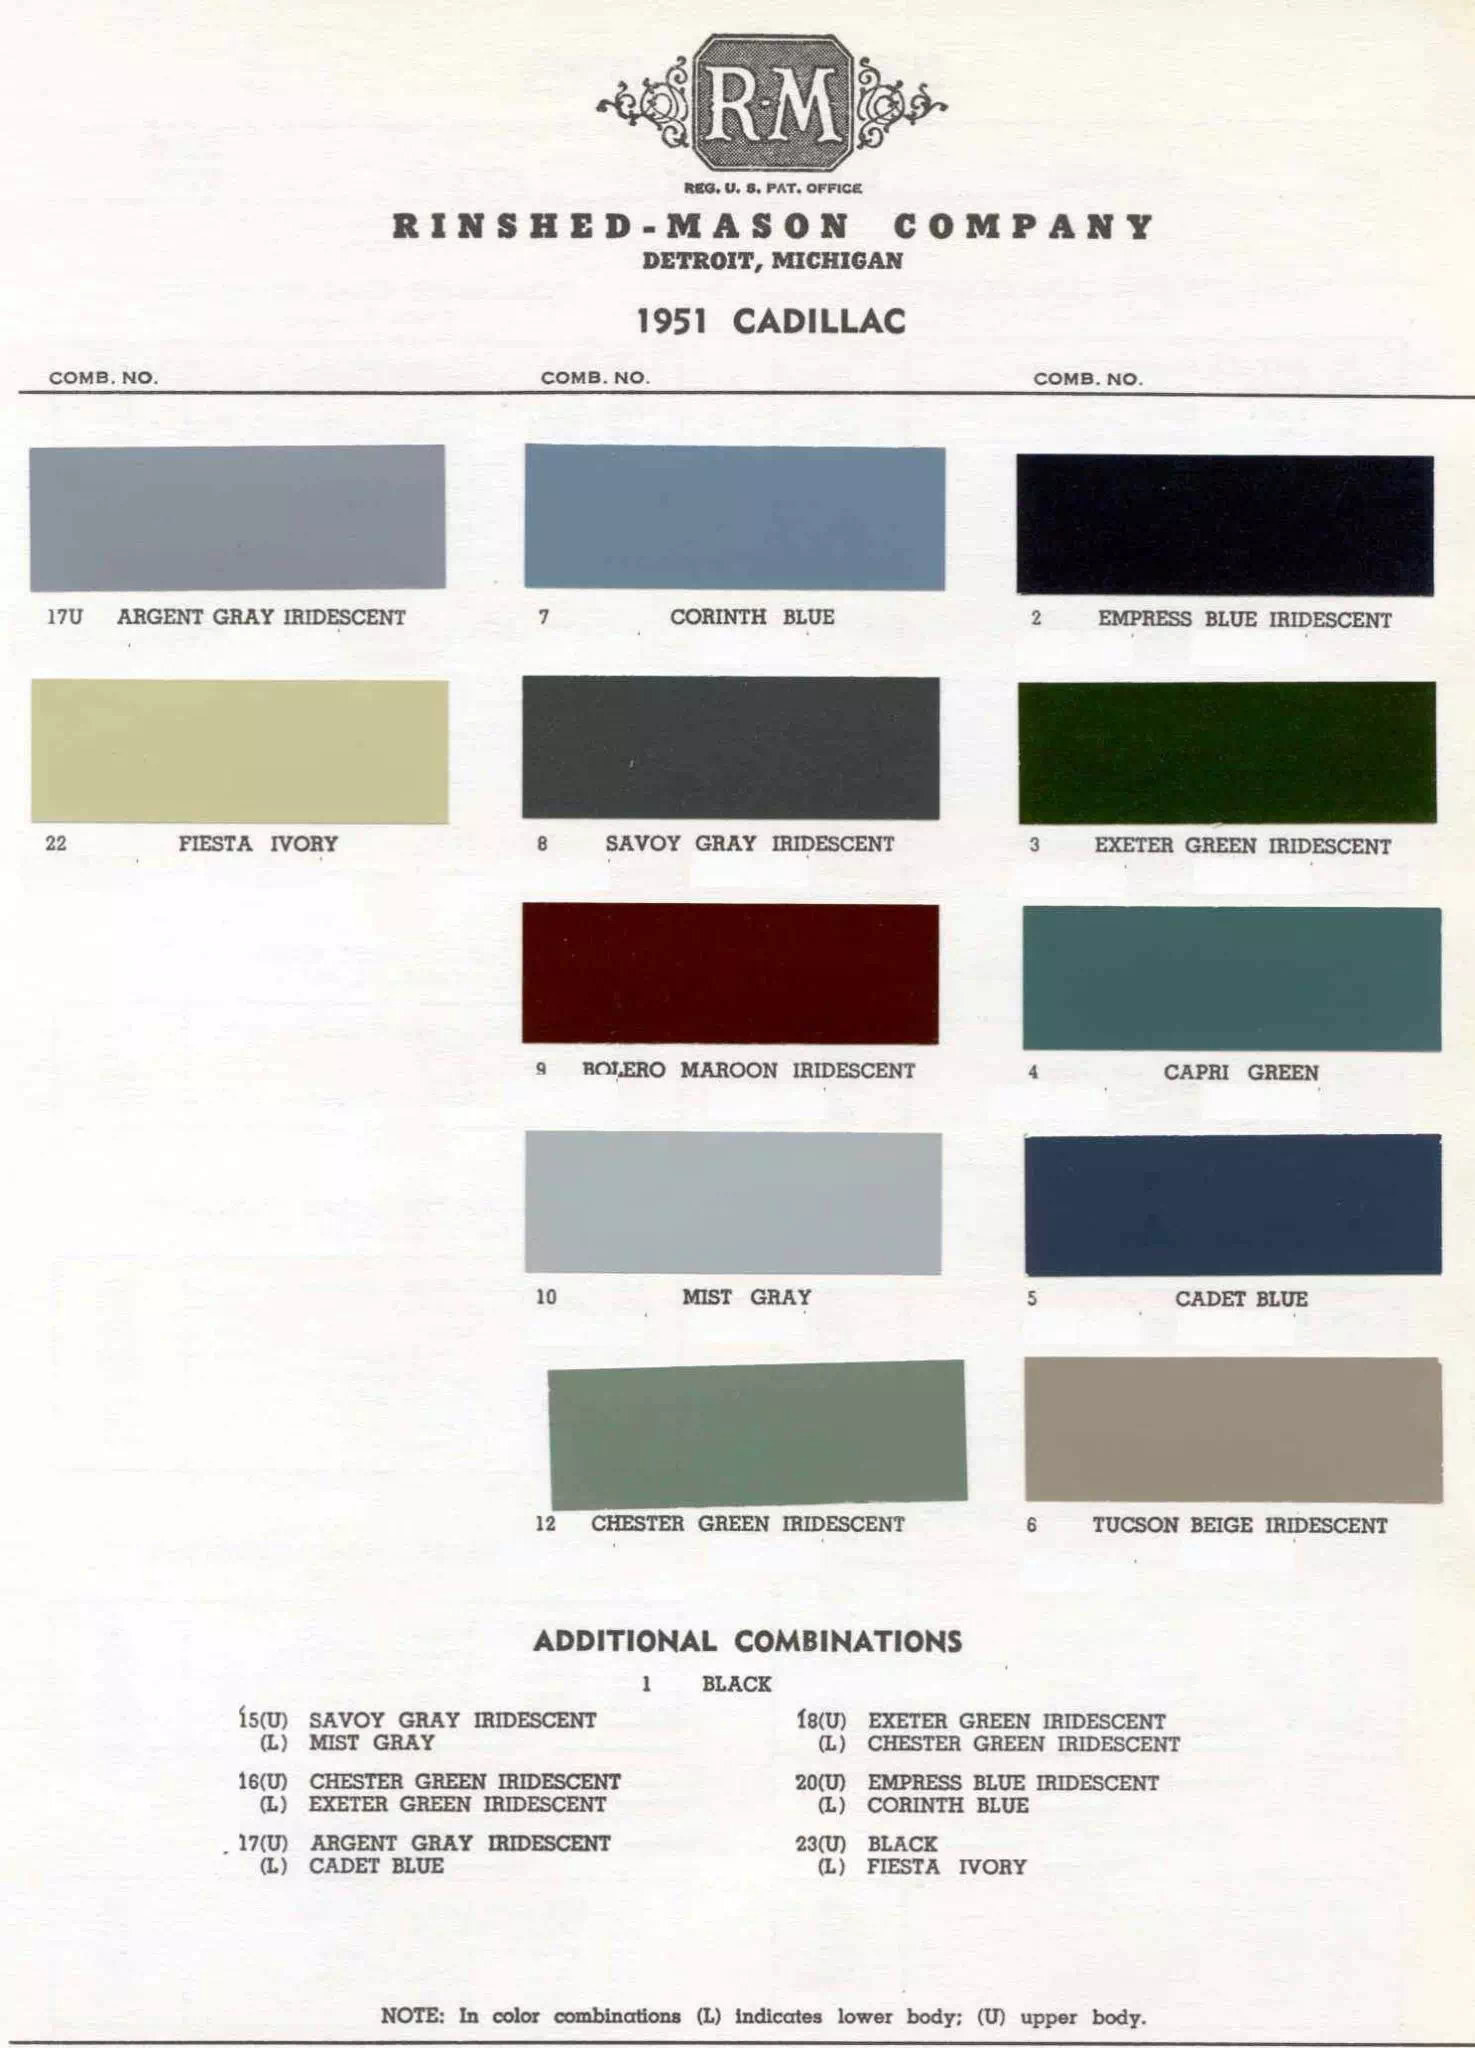 Summary of all Cadillac Colors used in 1951